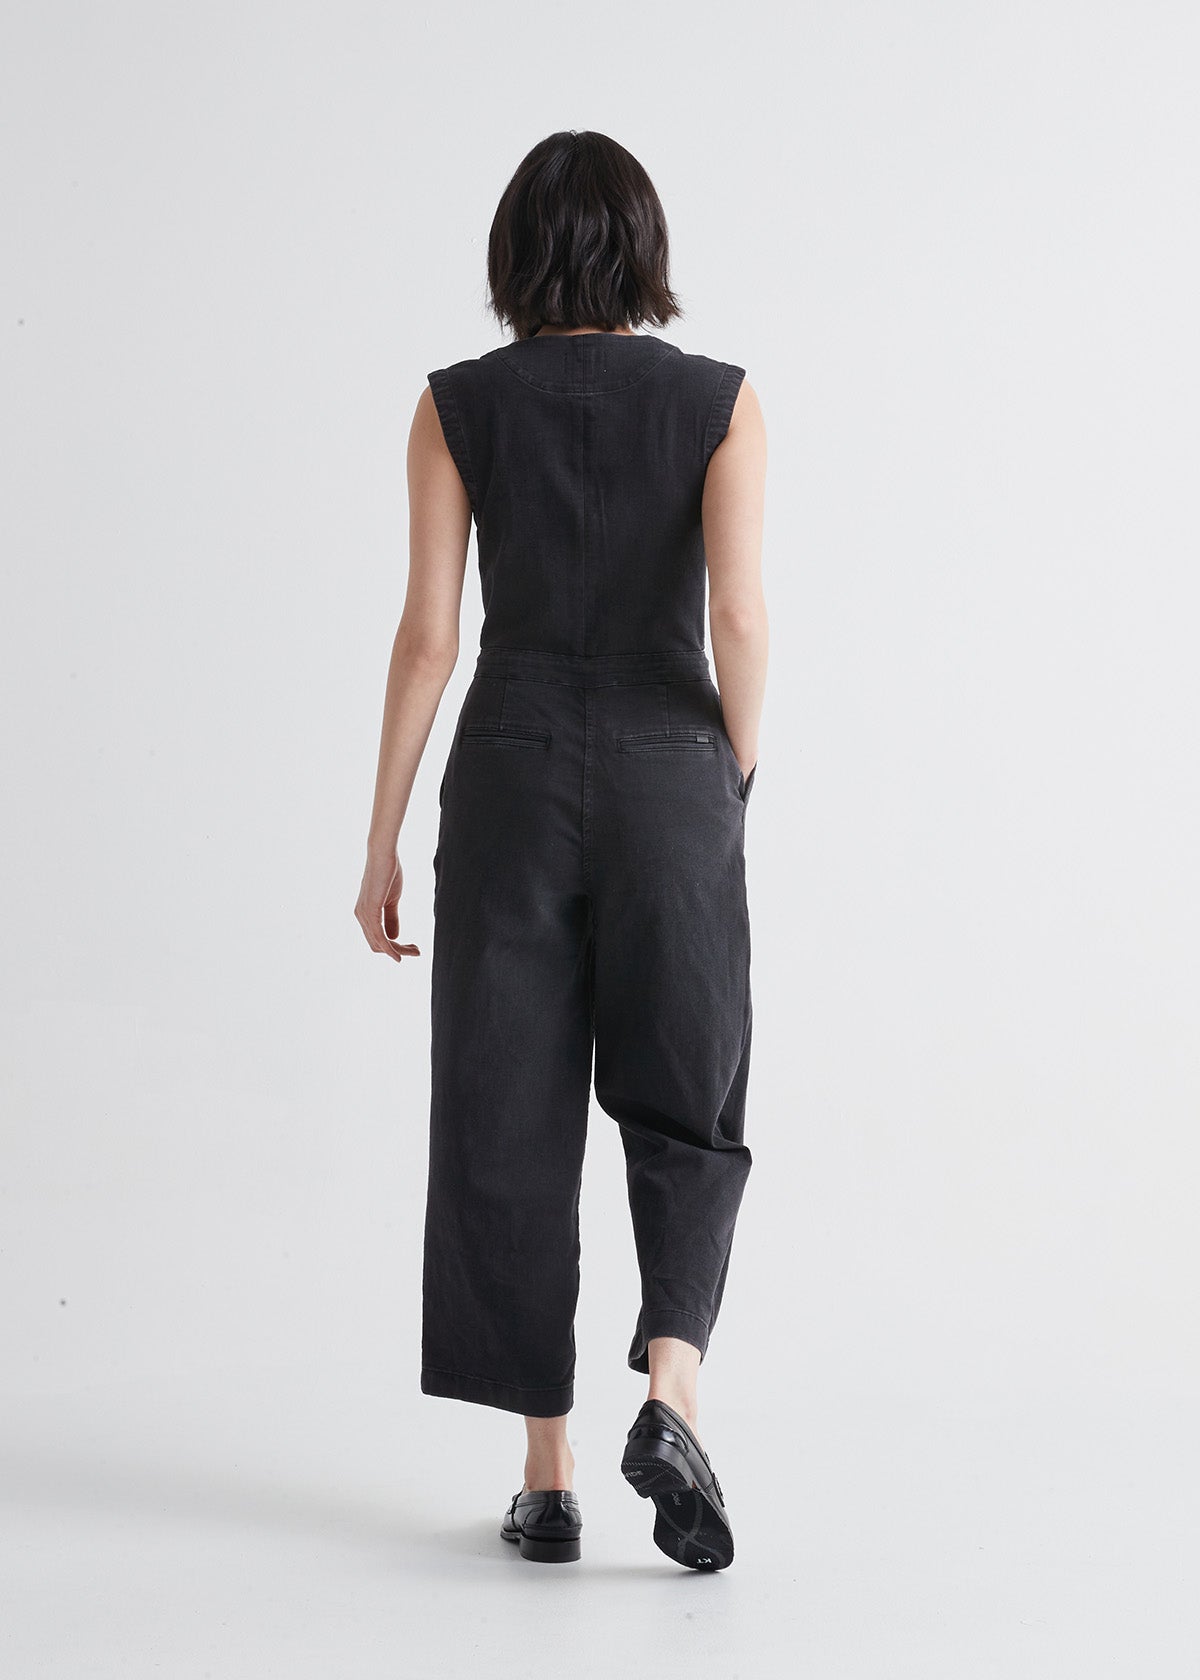 Lucie Wide-Leg Jumpsuit in Micro Daisy